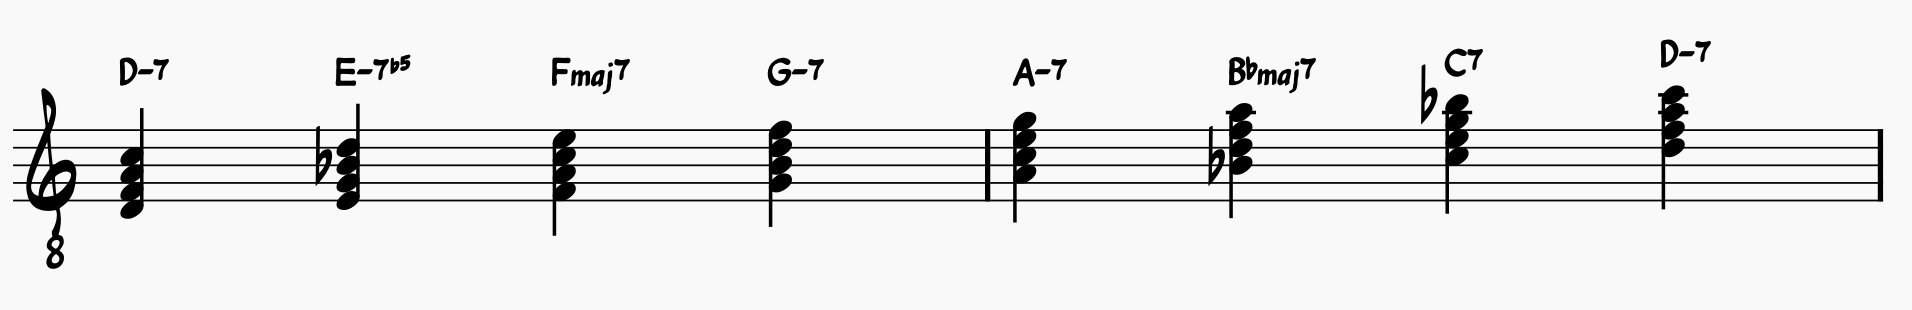 D natural minor scale harmonized in 7th chords